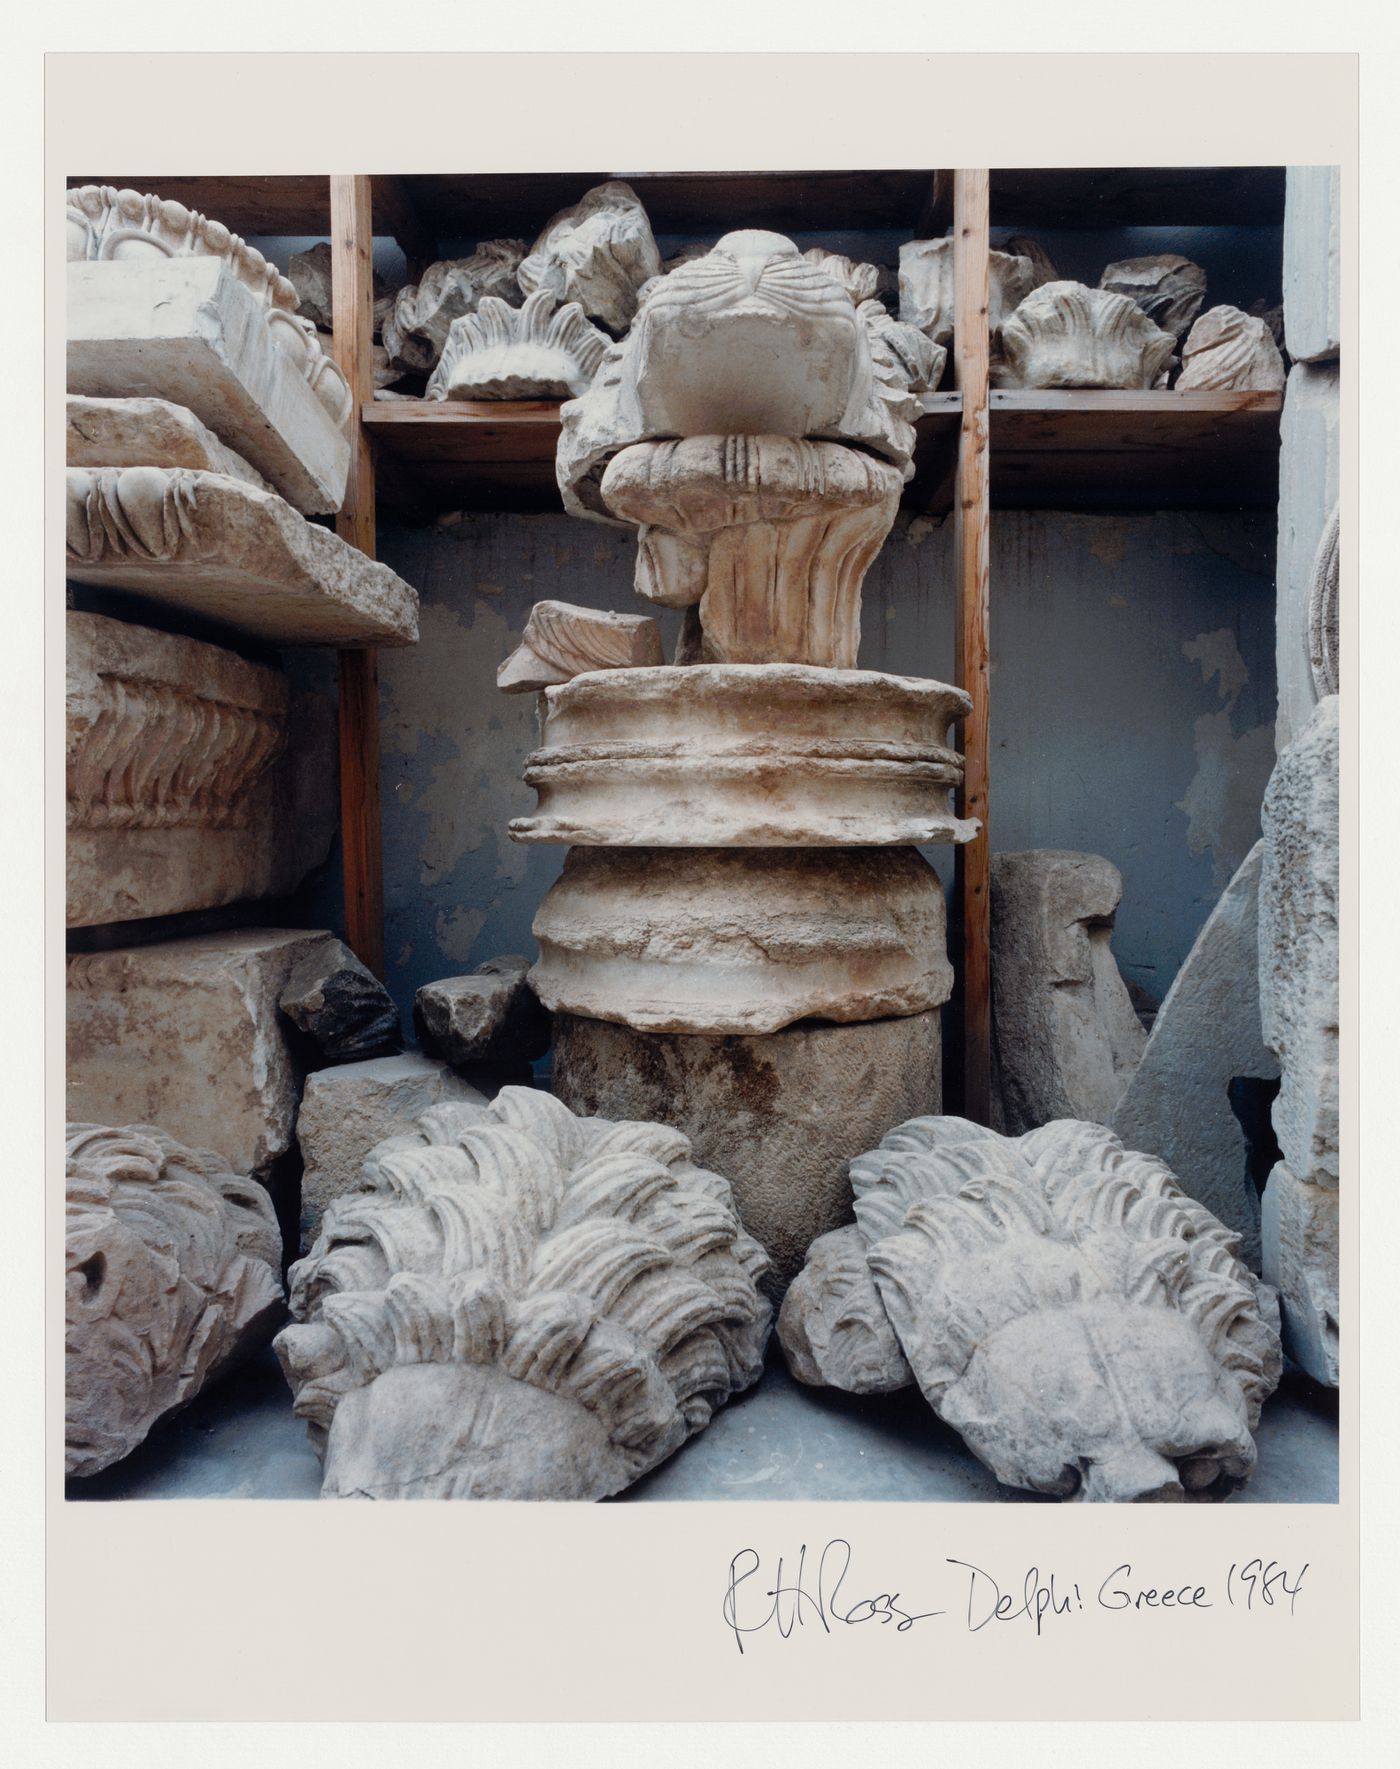 Close-ups of stone fragments in the museum, Corinthian column fragments in foreground, Delphi, Greece